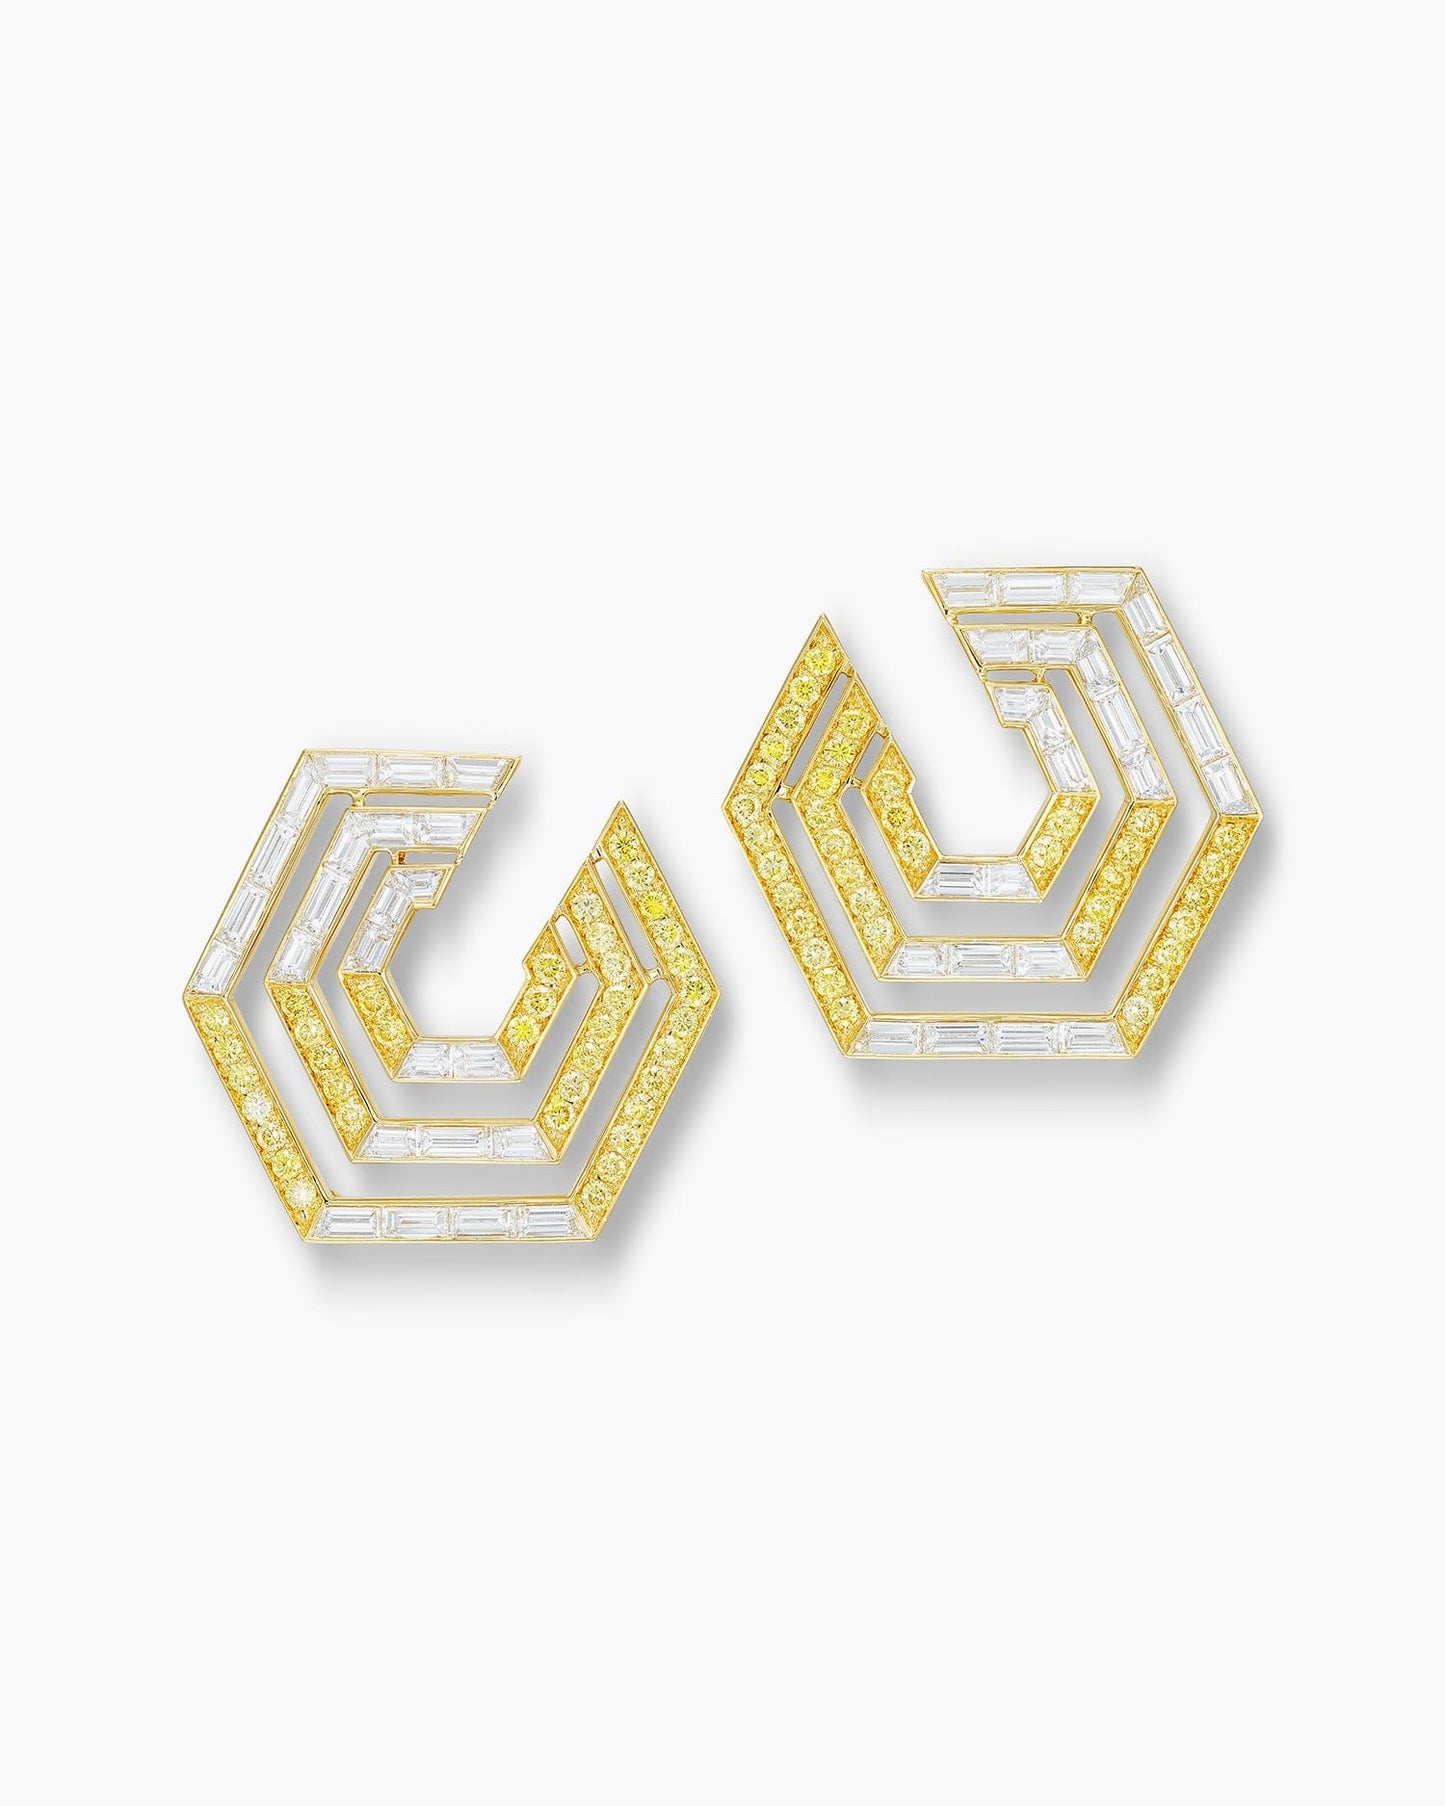 Yellow and White Diamond Concentrica Earrings